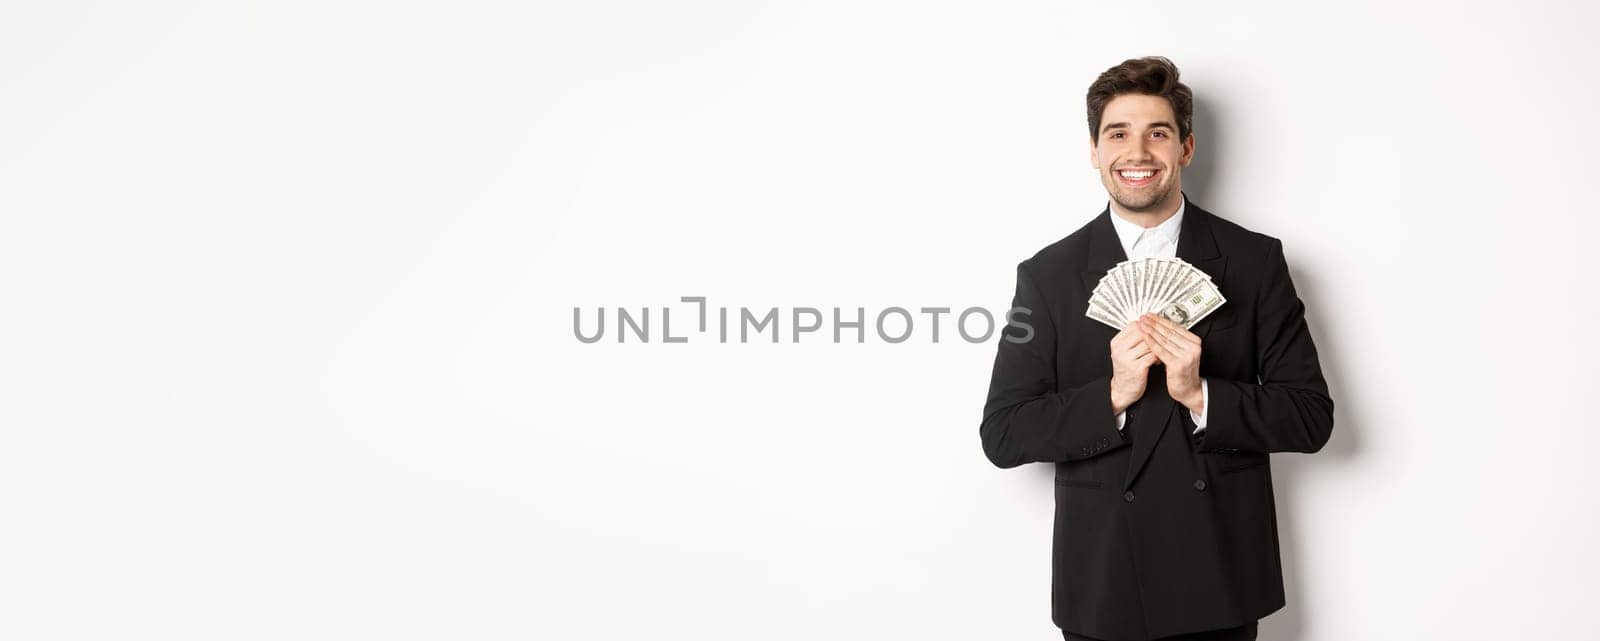 Portrait of happy and pleased handsome man in suit, hugging money and looking satisfied, standing over white background.